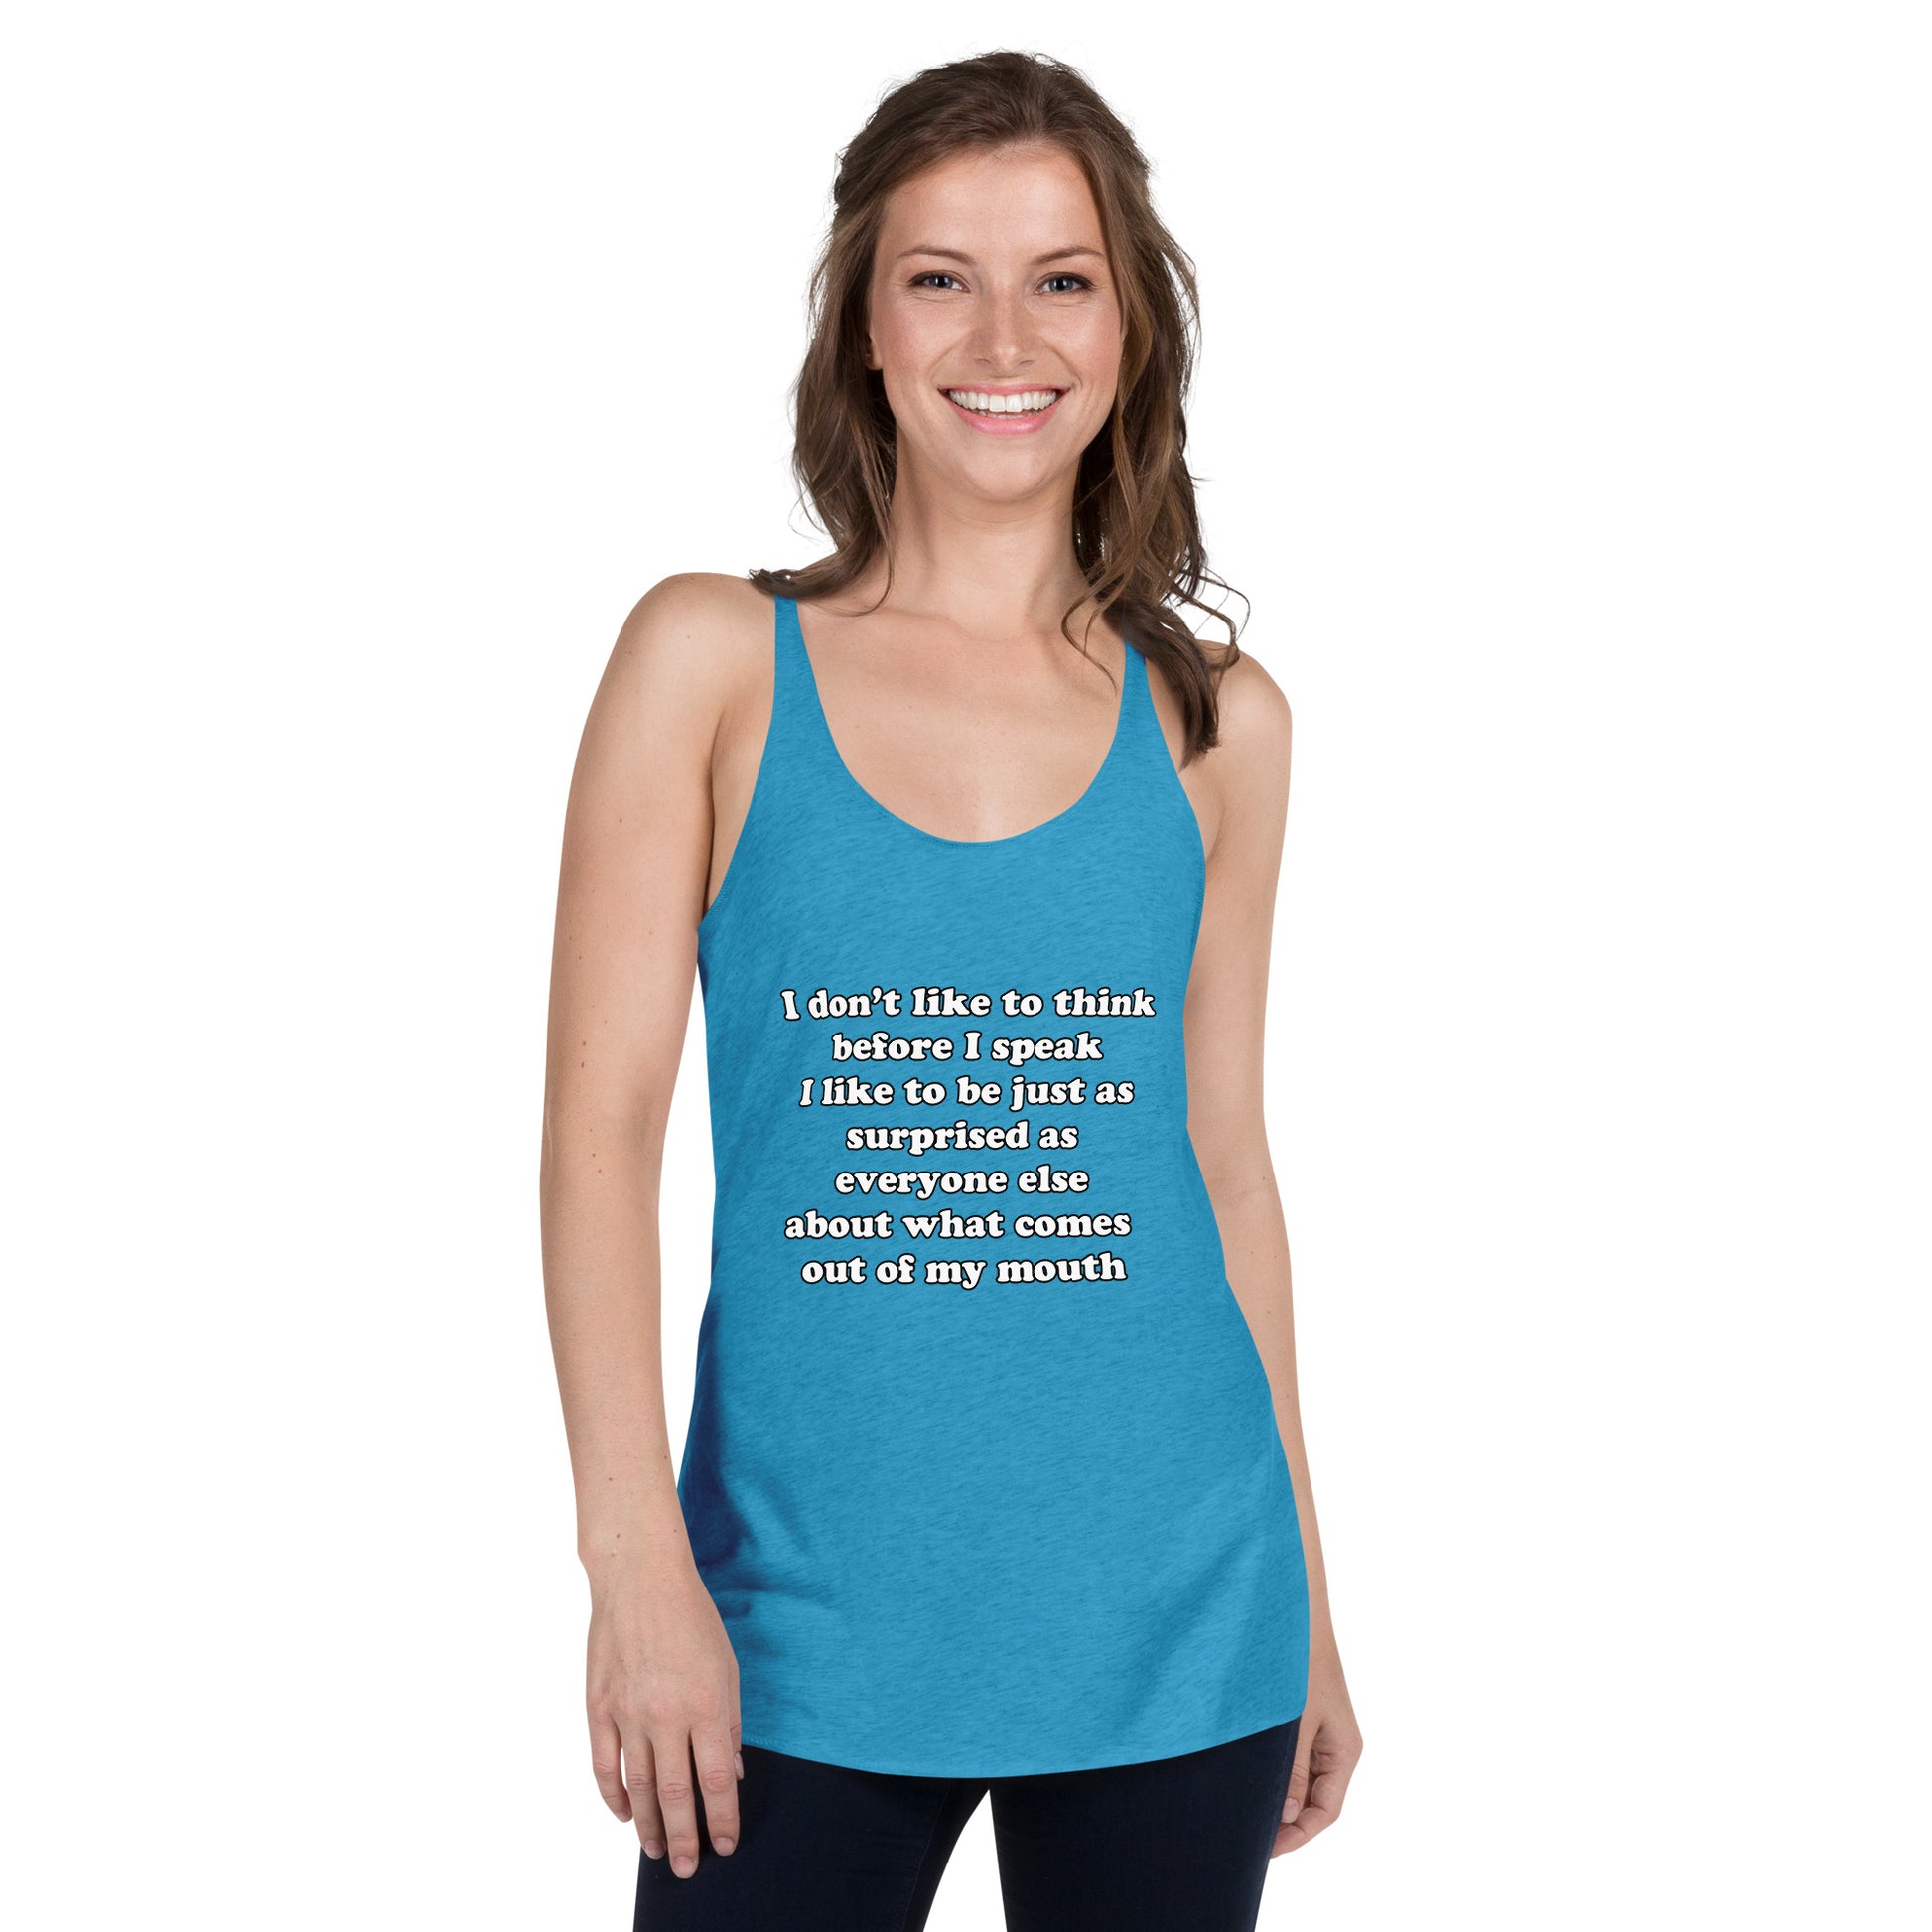 Woman with blue tank top with text “I don't think before I speak Just as serprised as everyone about what comes out of my mouth"